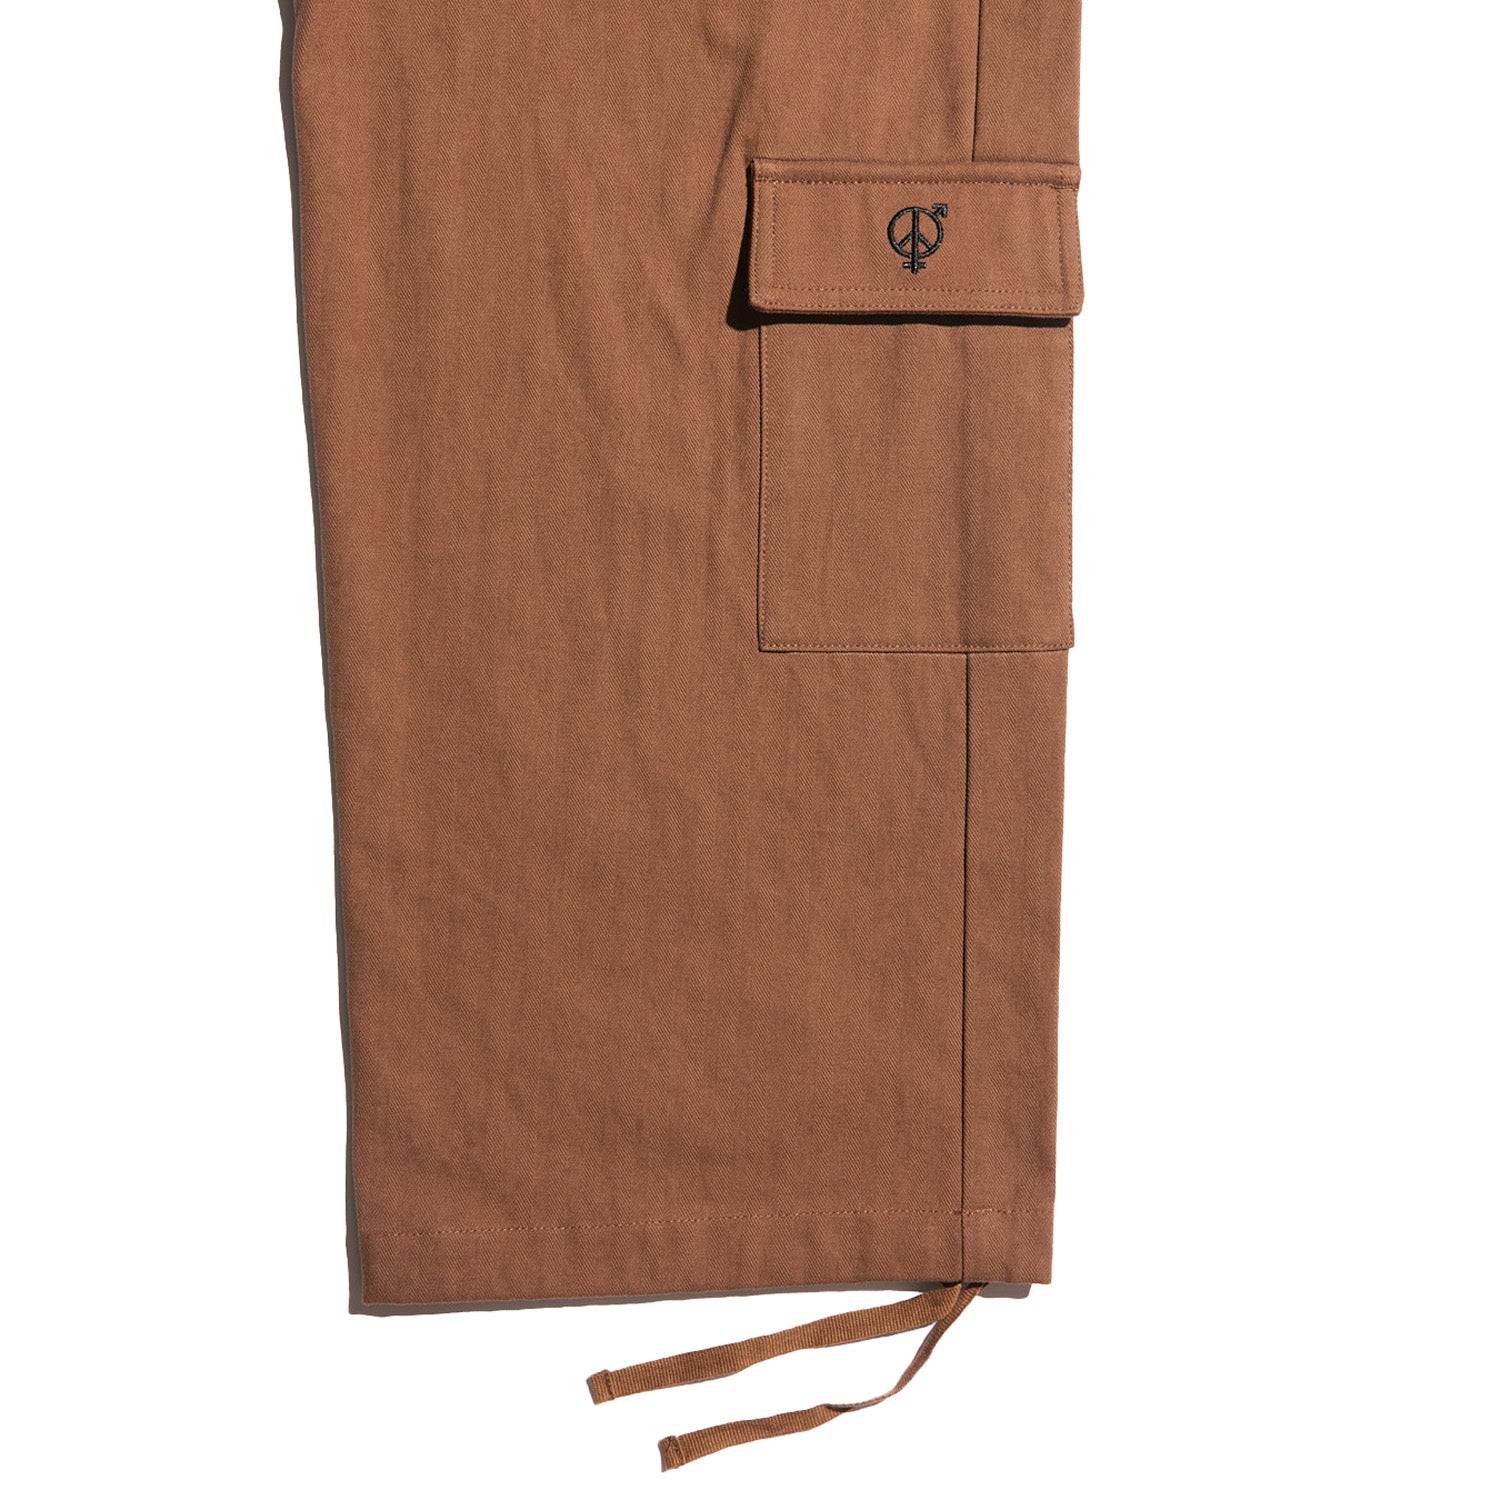 Fixed Waist Relaxed Fit Cargo Trouser | Cargo trousers, Khaki pants men,  Mens chino pants